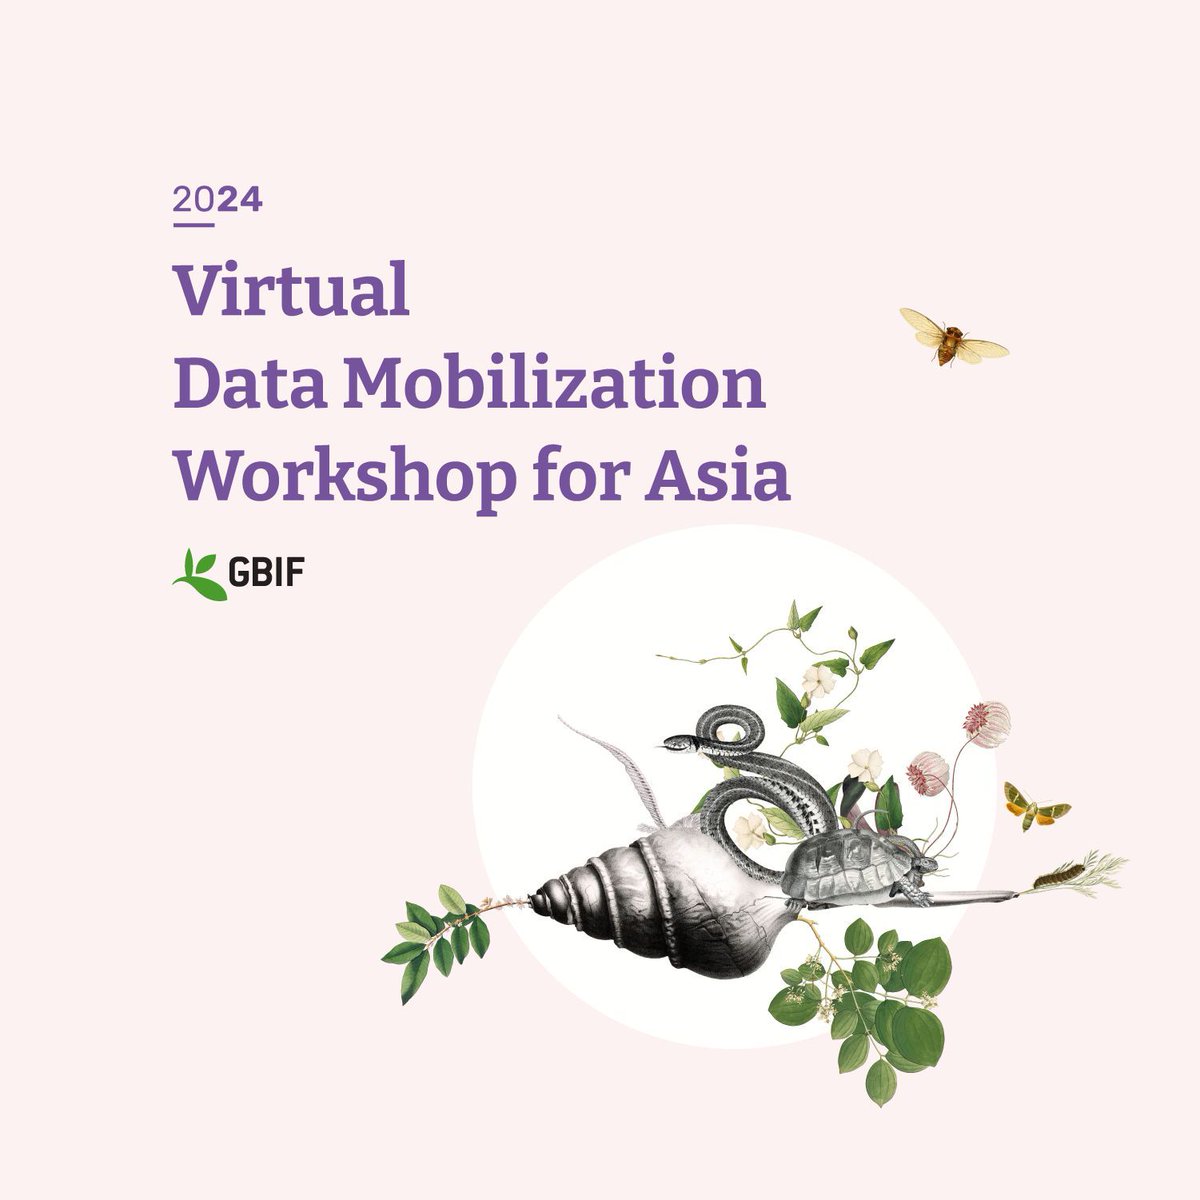 Are you a #biodiversity data holder in Asia? In late June, GBIF kicks off a virtual Data Mobilization #Workshop covering project management, data capture, management and publication, with a focus on GBIF's tools and infrastructure. For more information: gbif.org/event/3JFlnRme…